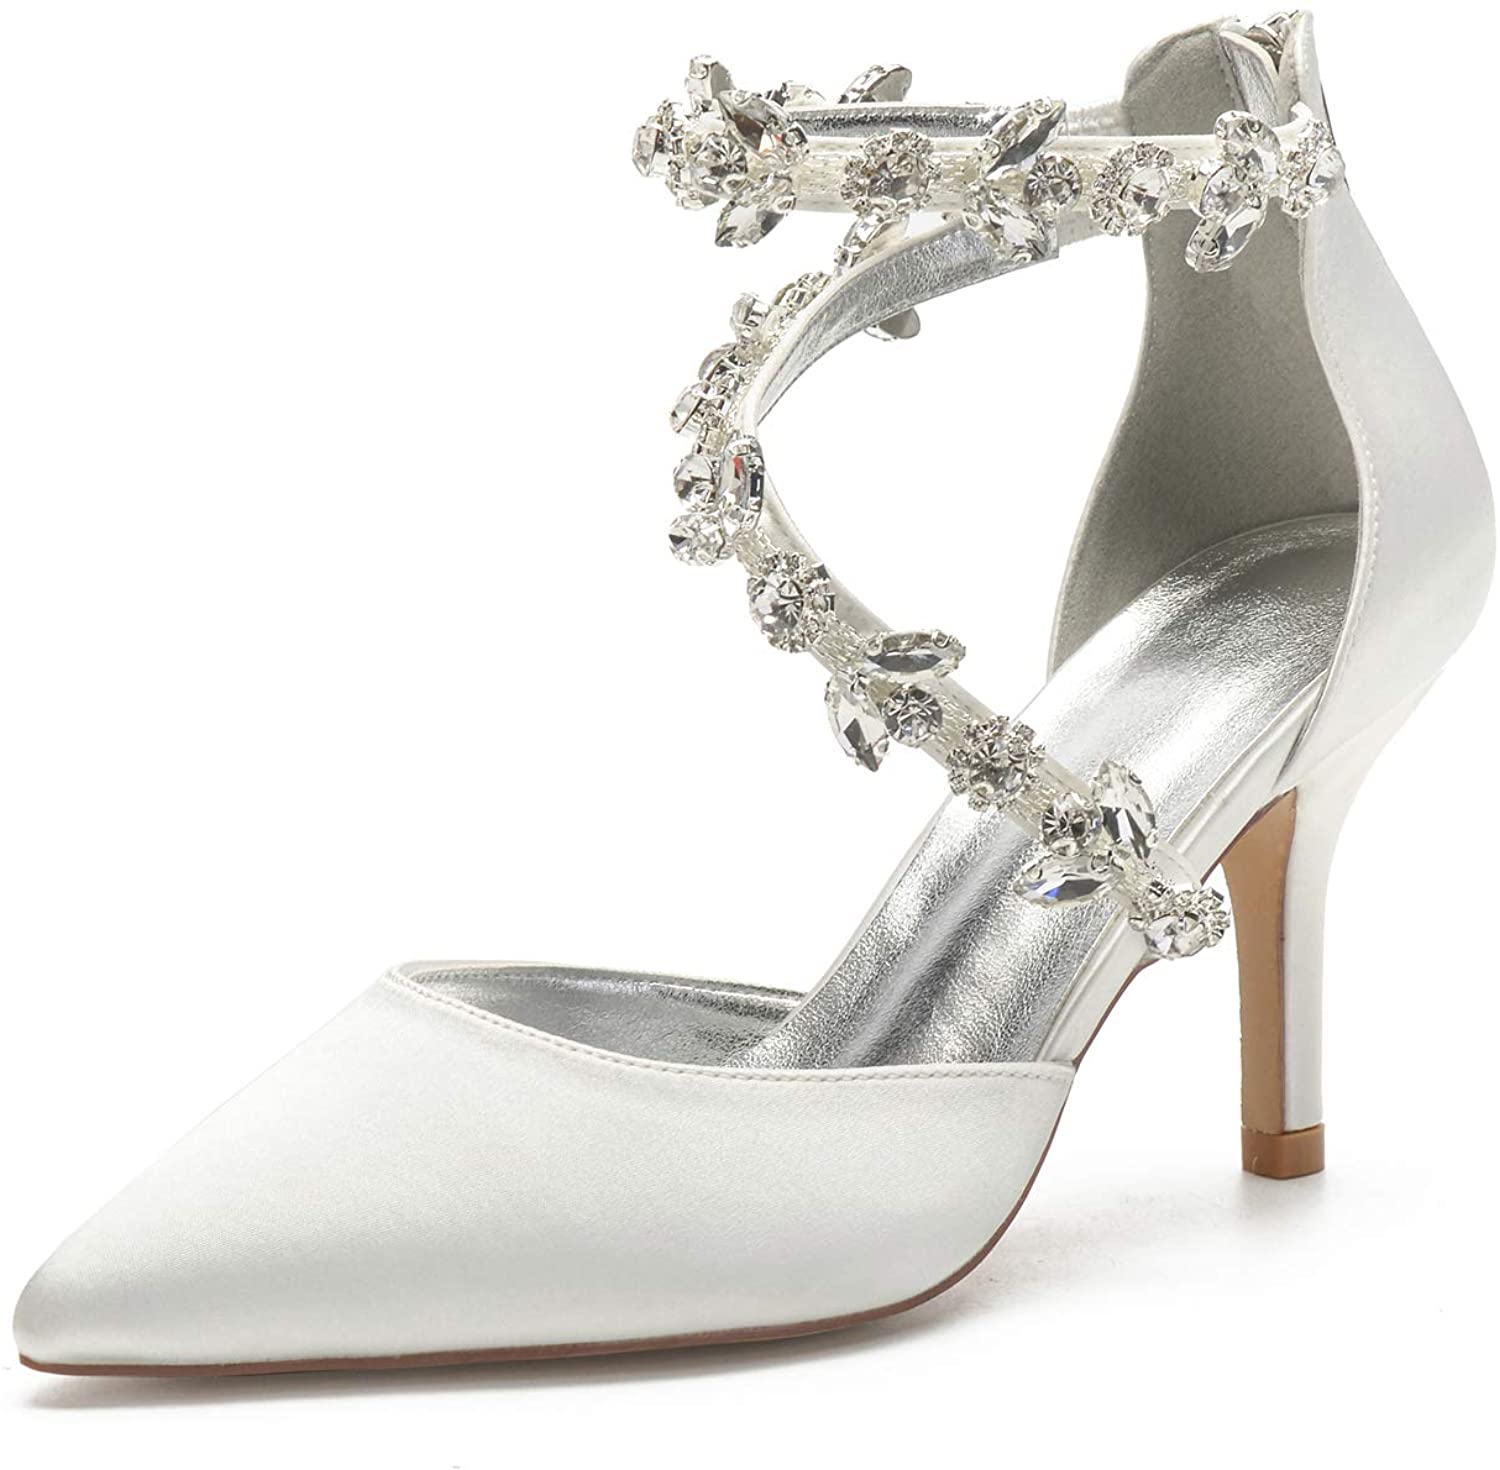 Best Classy and Comfortable Wedding Shoes: Anna’s Bridal Pumps